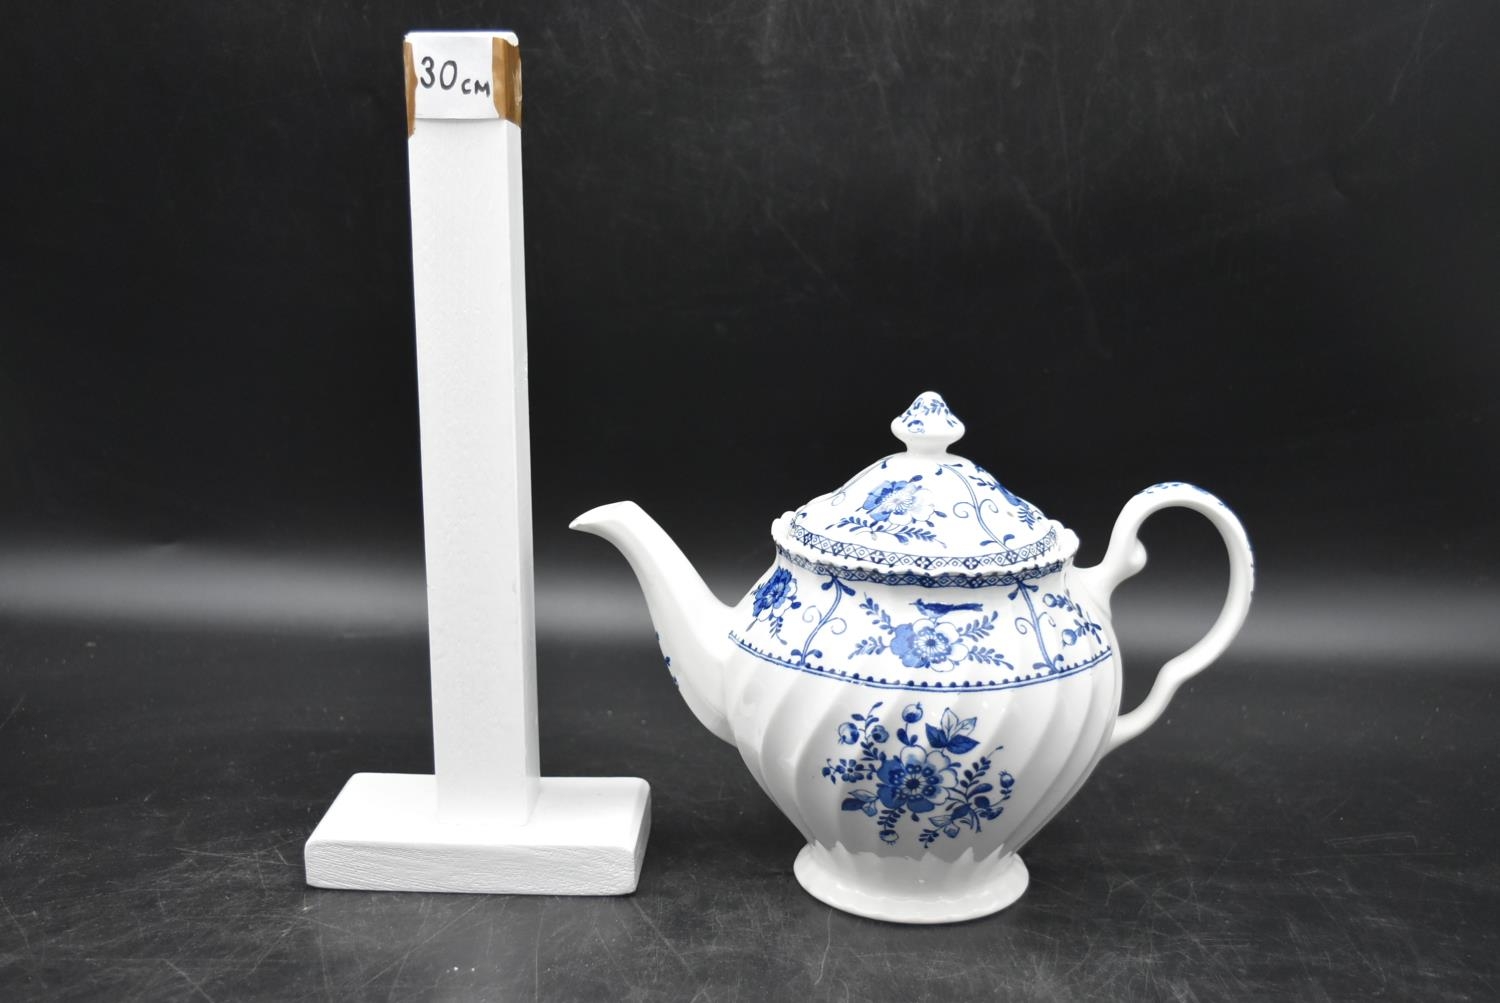 A Johnson Brothers 'Indies' design original stamped teapot along with a white unmarked teapot and - Image 16 of 16